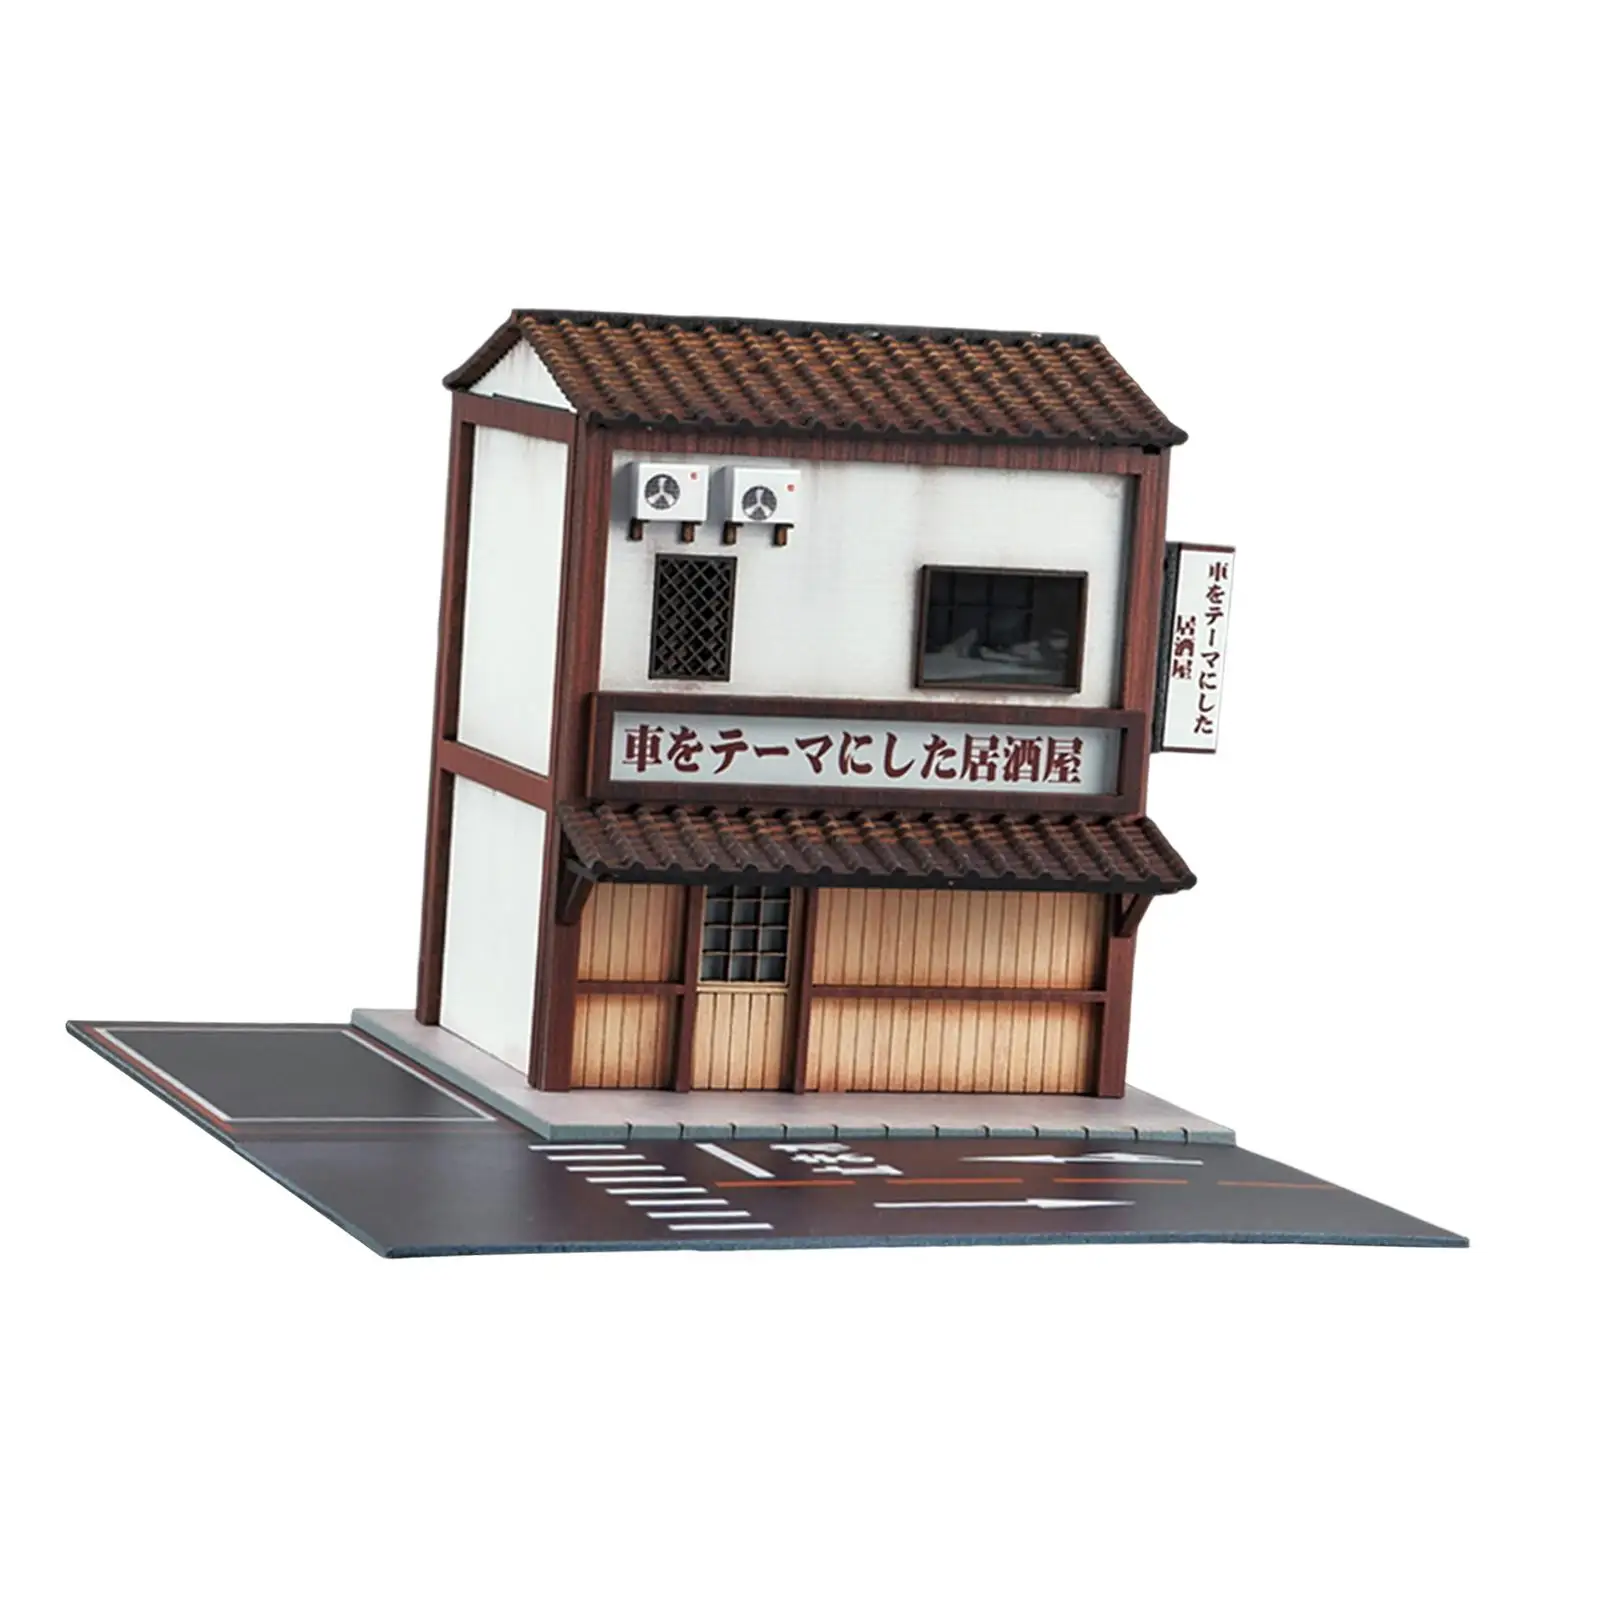 1:64 Parking Lots Model with Lights Miniature Scenes Decor Models Scenery for